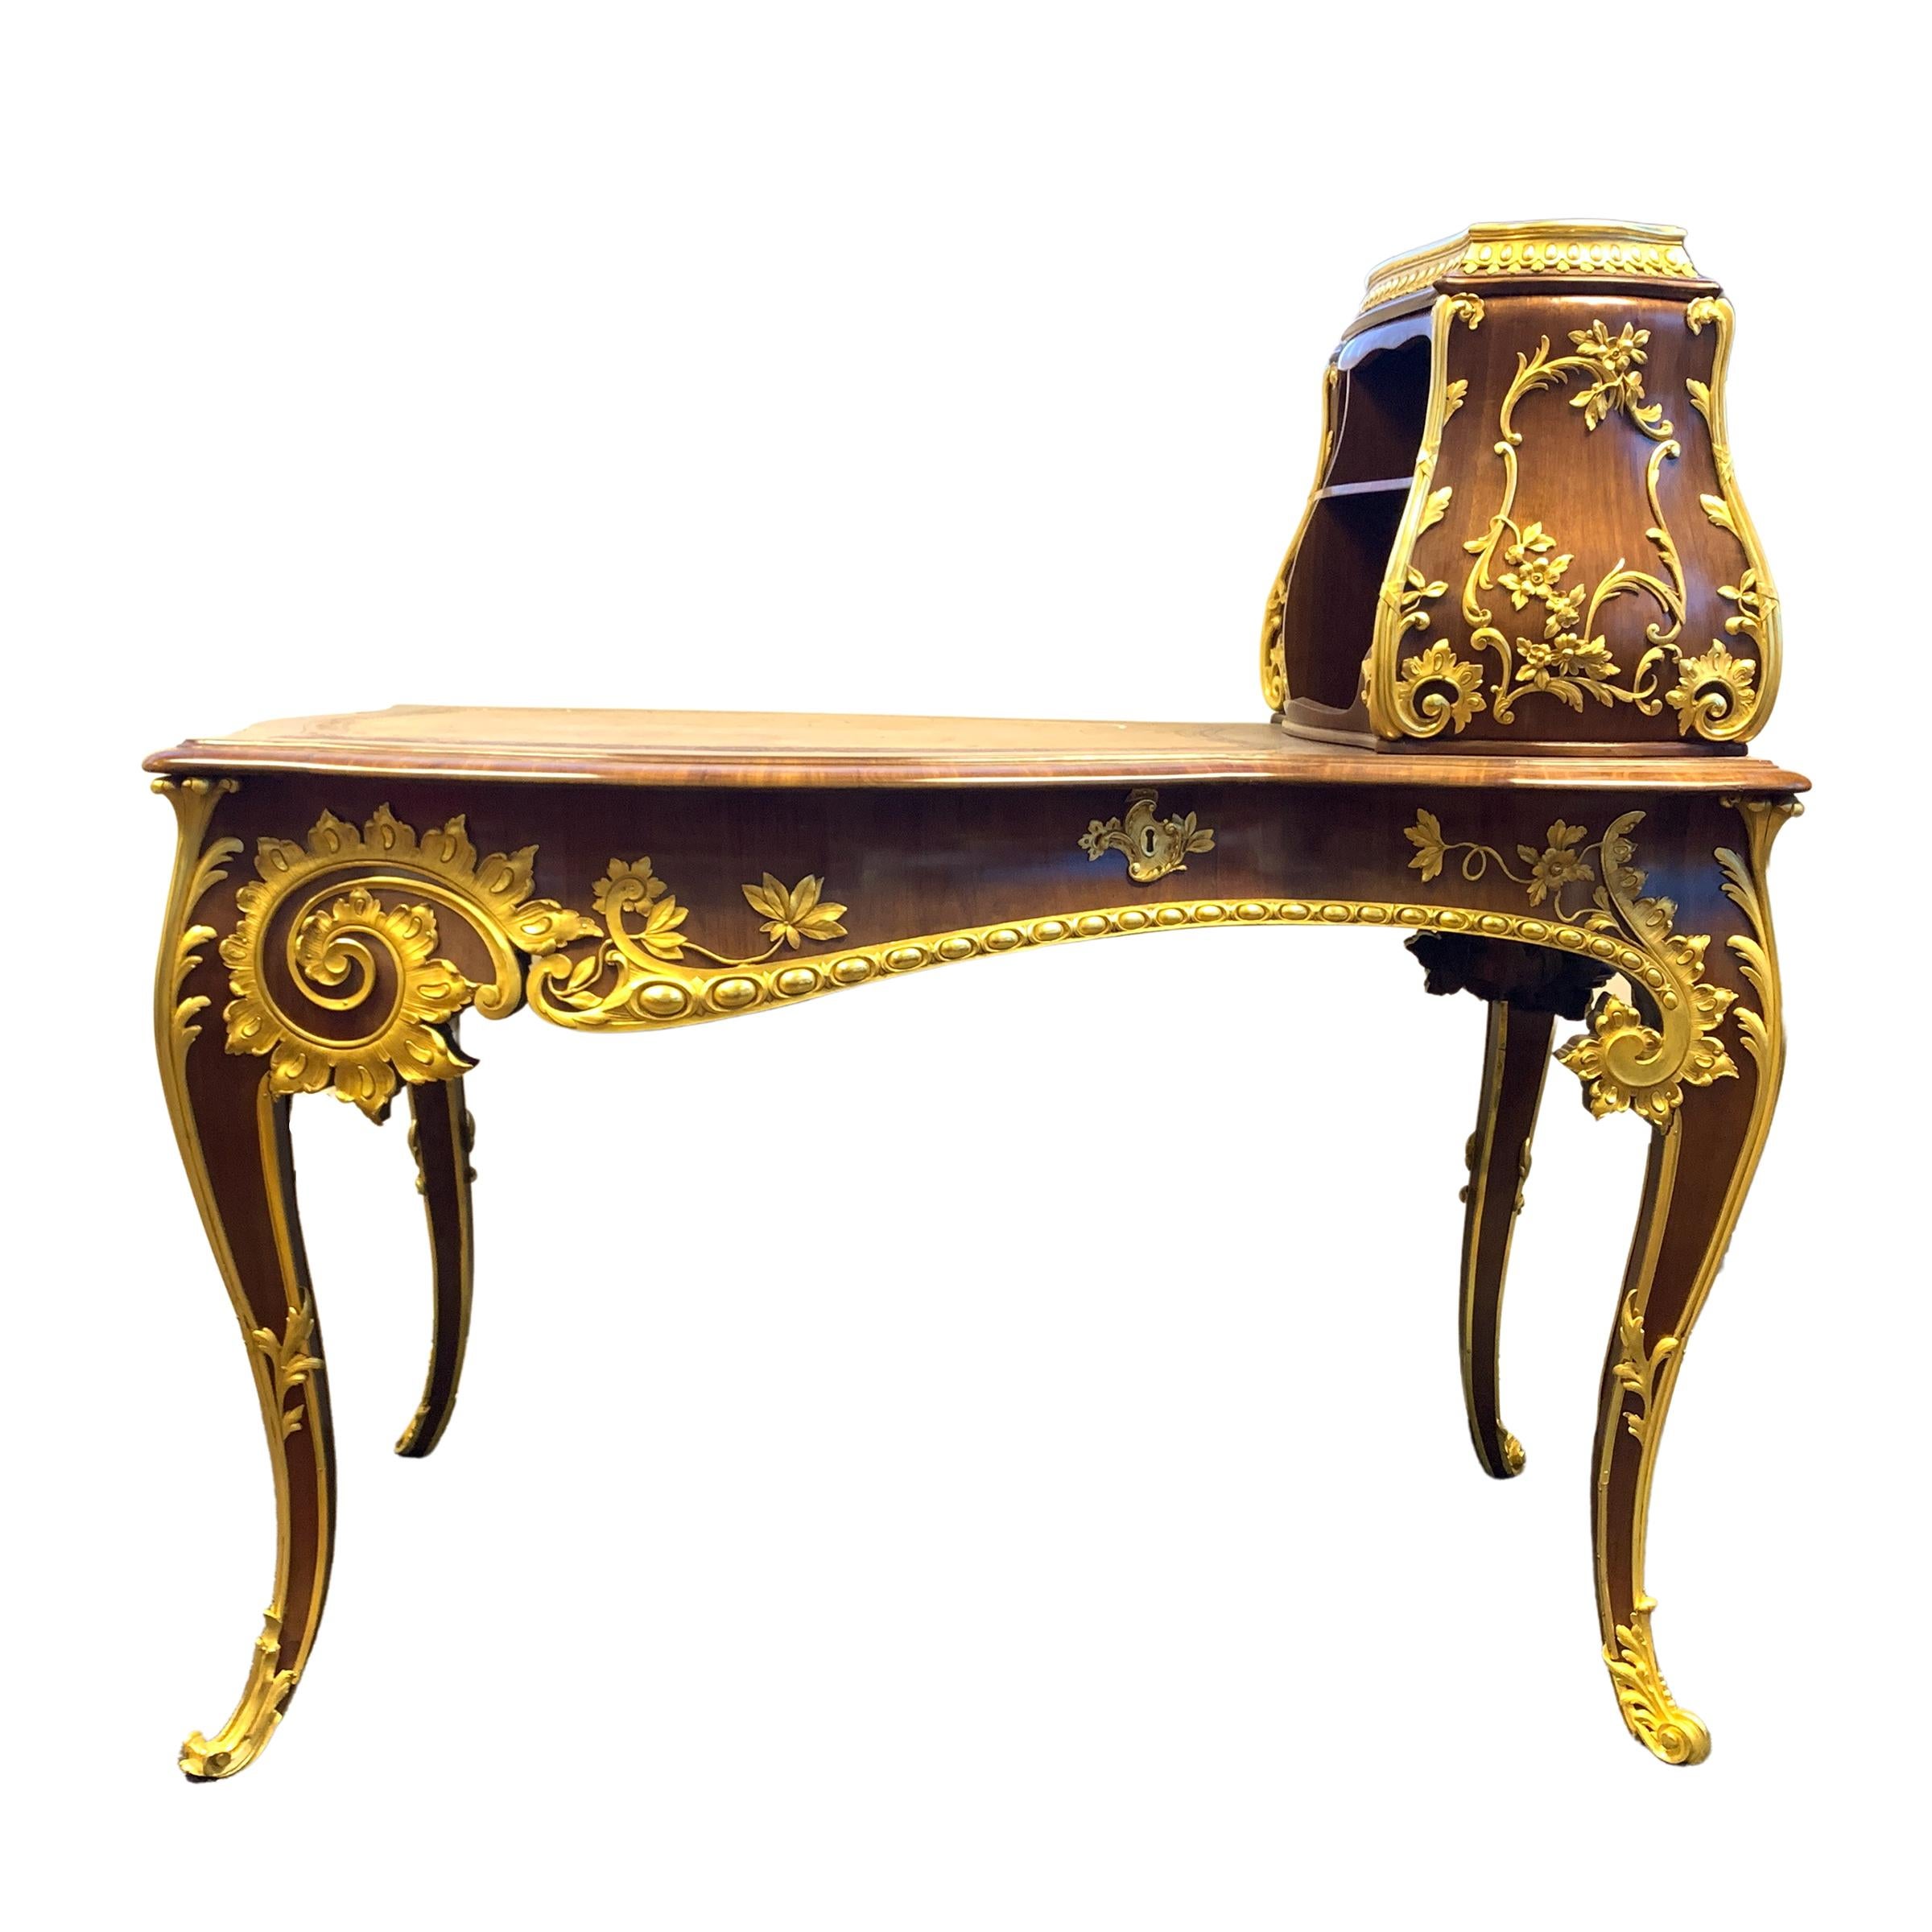 Exquisite quality wood and bronze inlaid desk with shelfs.
  